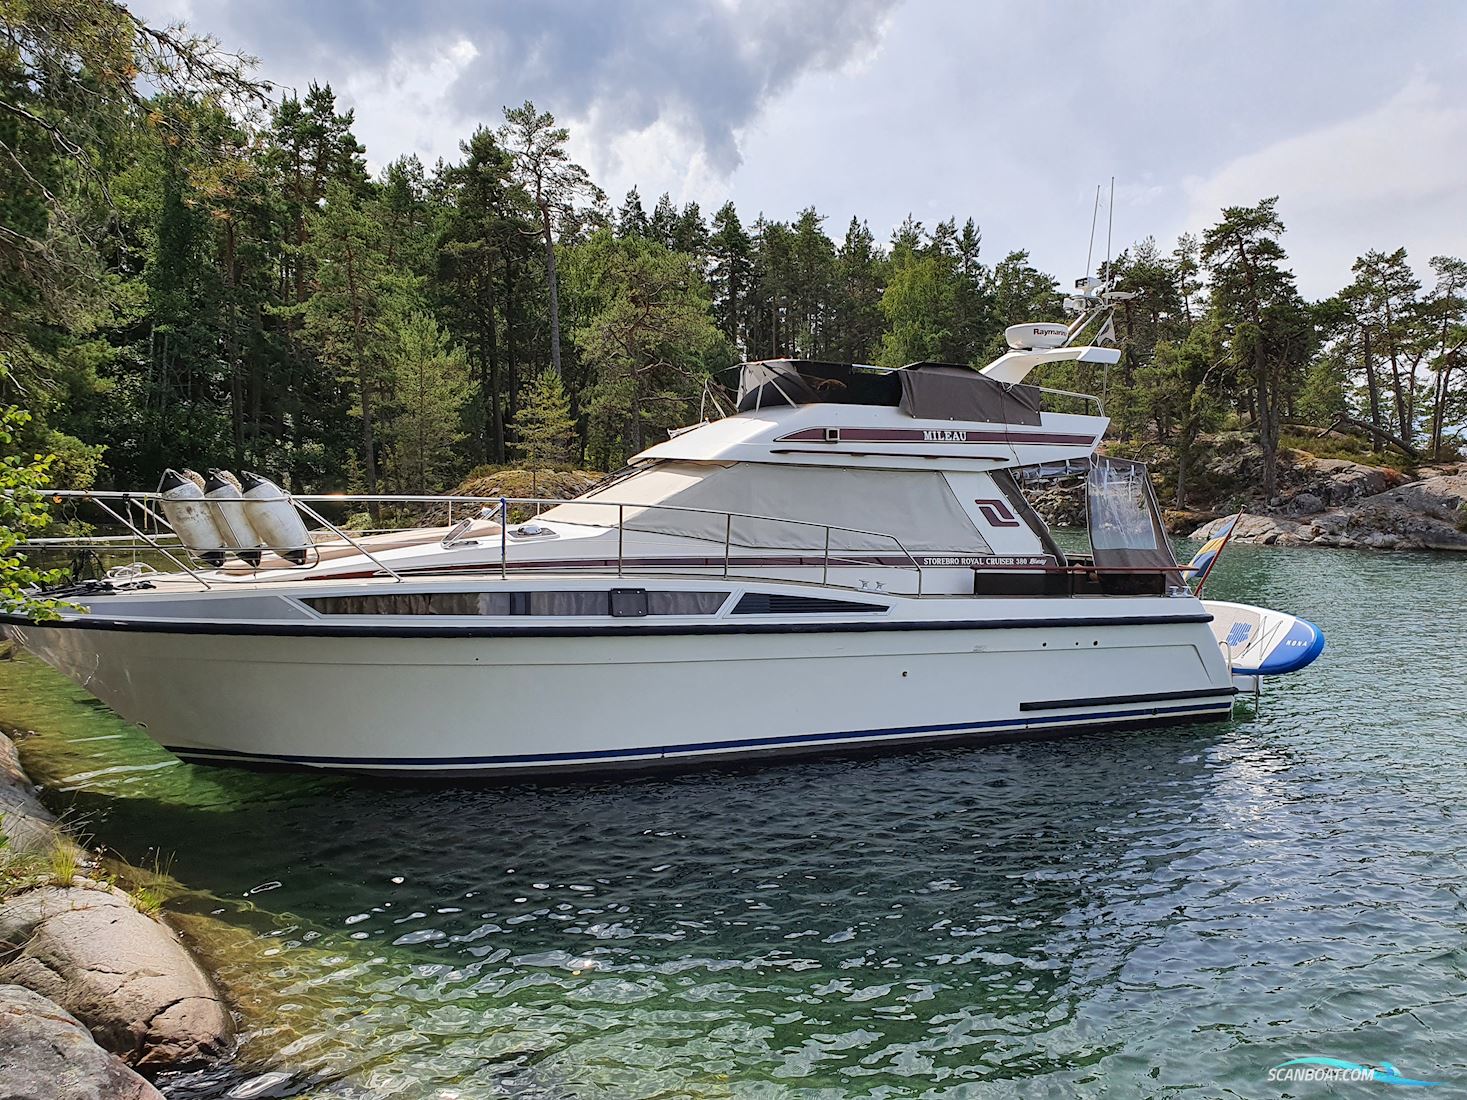 Storebro Royal Cruiser 380 Biscay Motor boat 1992, with 2 x Volvo Penta Tamd 63P-A -2004 engine, Sweden